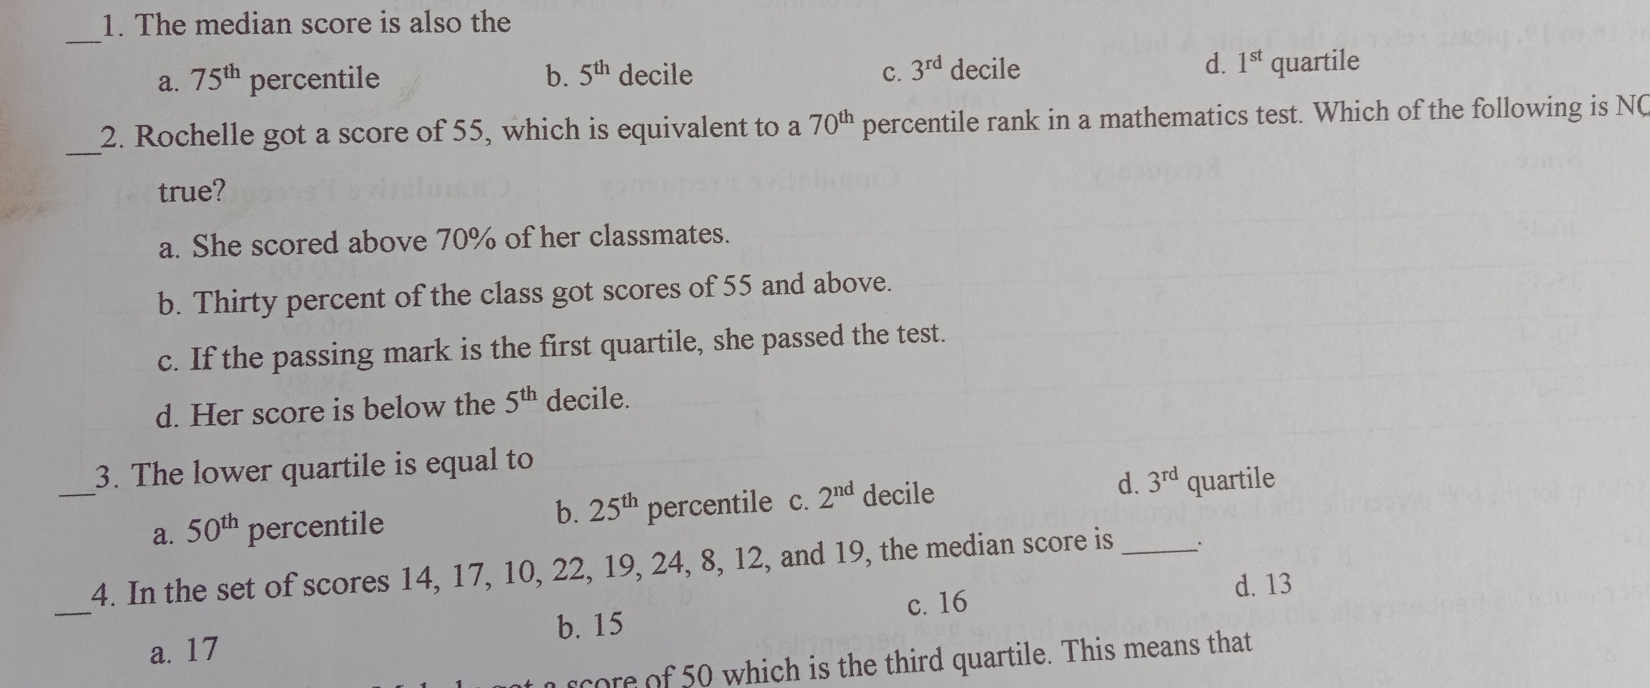 1. The median score is also the _ a. 75th percentile b. 5th decile C. 3rd decile d. 1st quartile 2. Rochelle got a score of 55, which is equivalent to a 70th percentile rank in a mathematics test. Which of the following is NG _ true? a. She scored above 70% of her classmates. b. Thirty percent of the class got scores of 55 and above. c. If the passing mark is the first quartile, she passed the test. d. Her score is below the 5th decile. 3. The lower quartile is equal to _ a. 50th percentile percentile c. 2nd decile d. 3rd quartile b. 25th 4. In the set of scores 14, 17, 10, 22, 19, 24, 8, 12, and 19, the median score is a, 17 b. 15 c. 16 d. 13 _ 0rOre nf 50 which is the third quartile. This means that